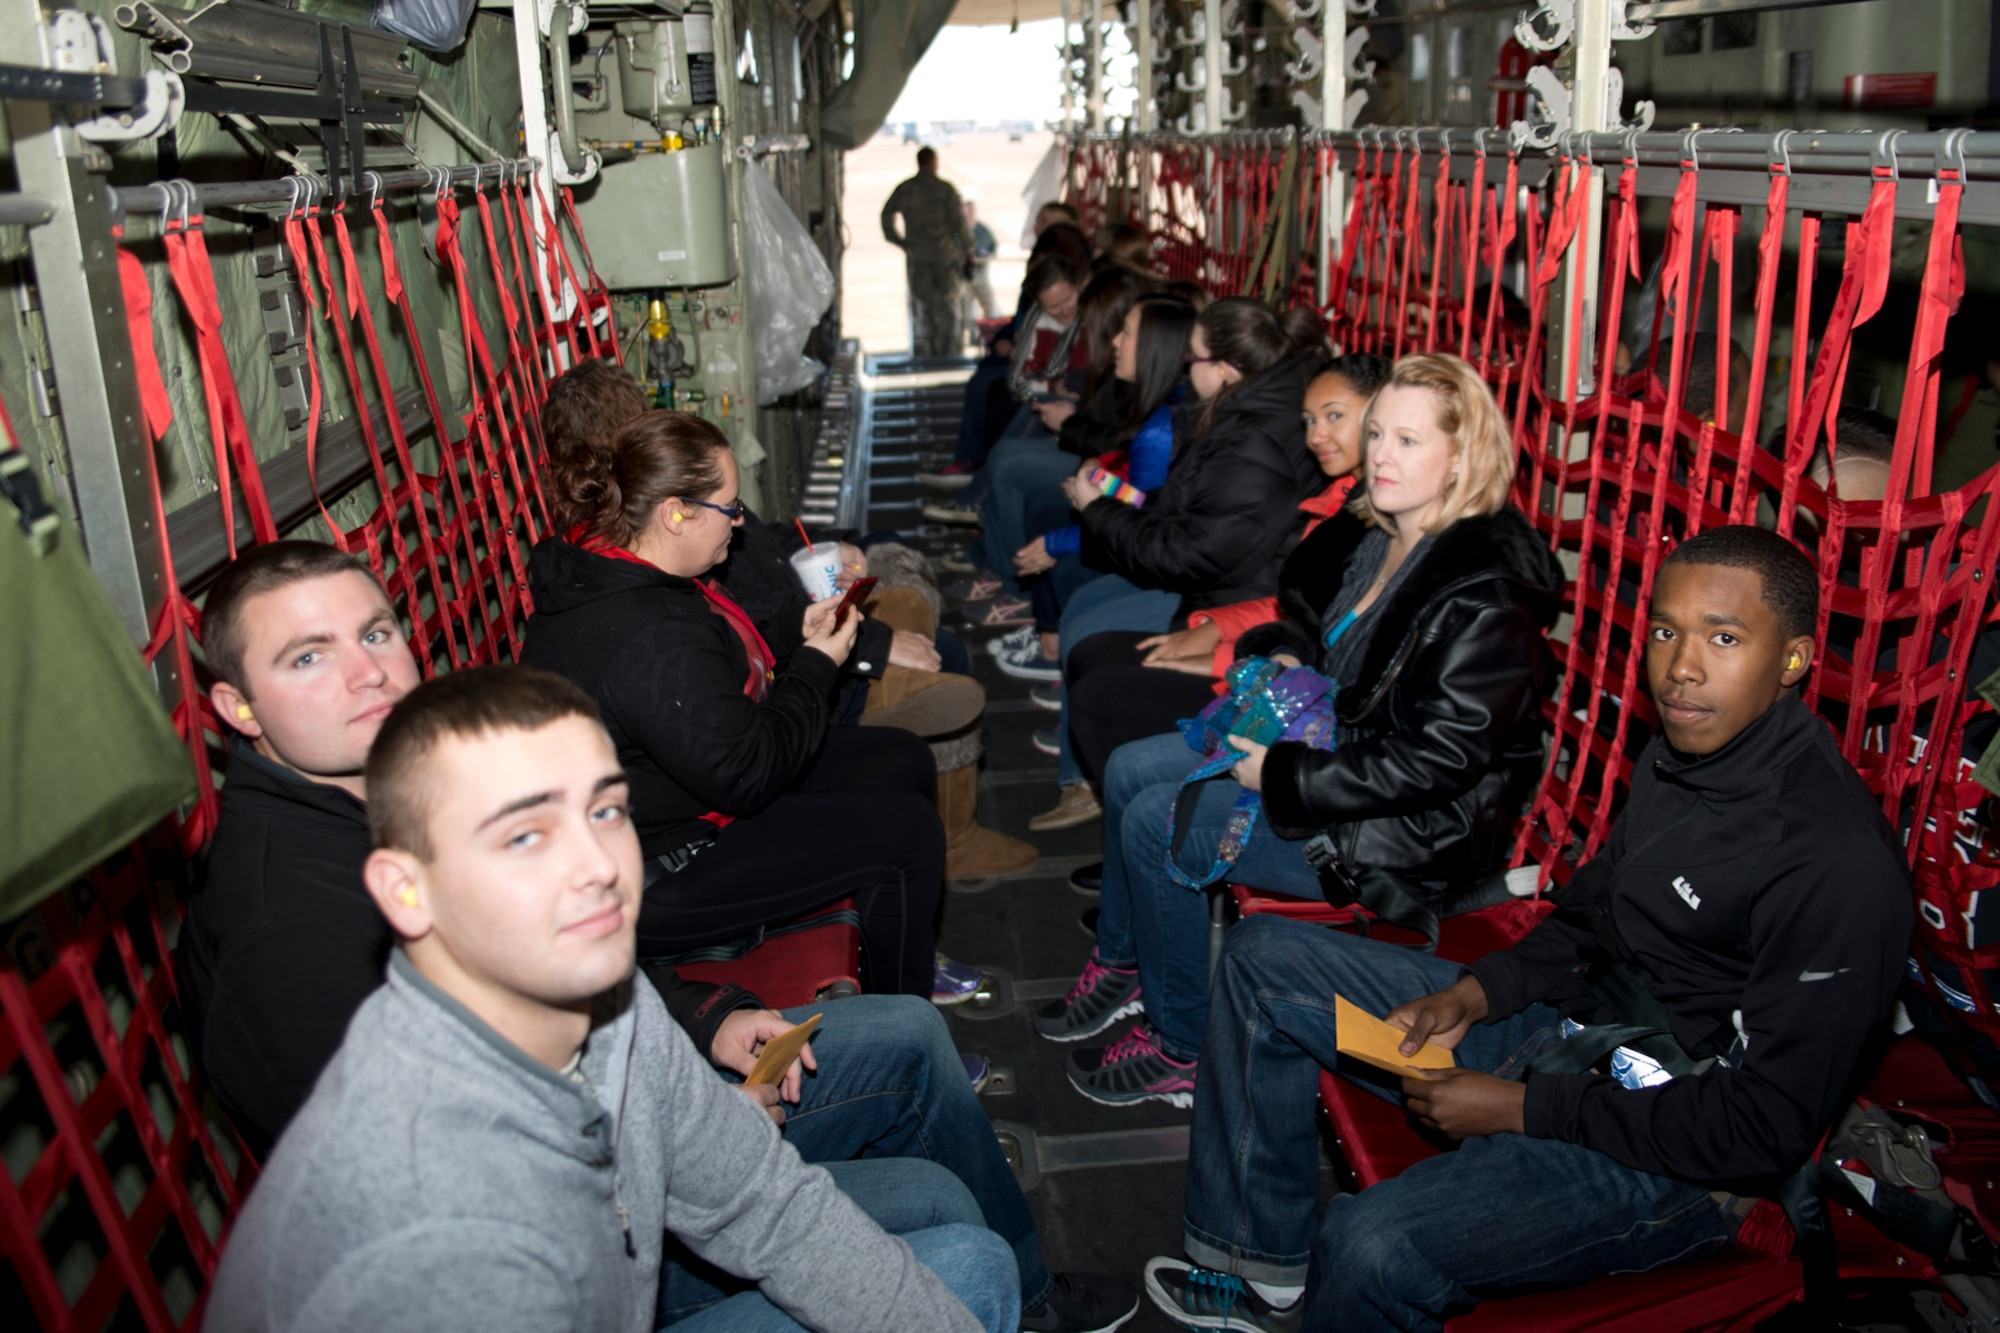 Spouses from the 913th Airlift Group try to get comfortable on seats made of nylon fabric wrapped around a lightweight aluminum alloy frame, while awaiting takeoff onboard a C-130H Hercules aircraft at Little Rock Air Force Base, Ark,., Dec. 5, 2015. The spouses were part of an incentive flight hosted by the 913th Airlift Group so they could better understand what their spouses do on a daily basis. (U.S. Air Force photo by Capt. Casey Staheli/Released)